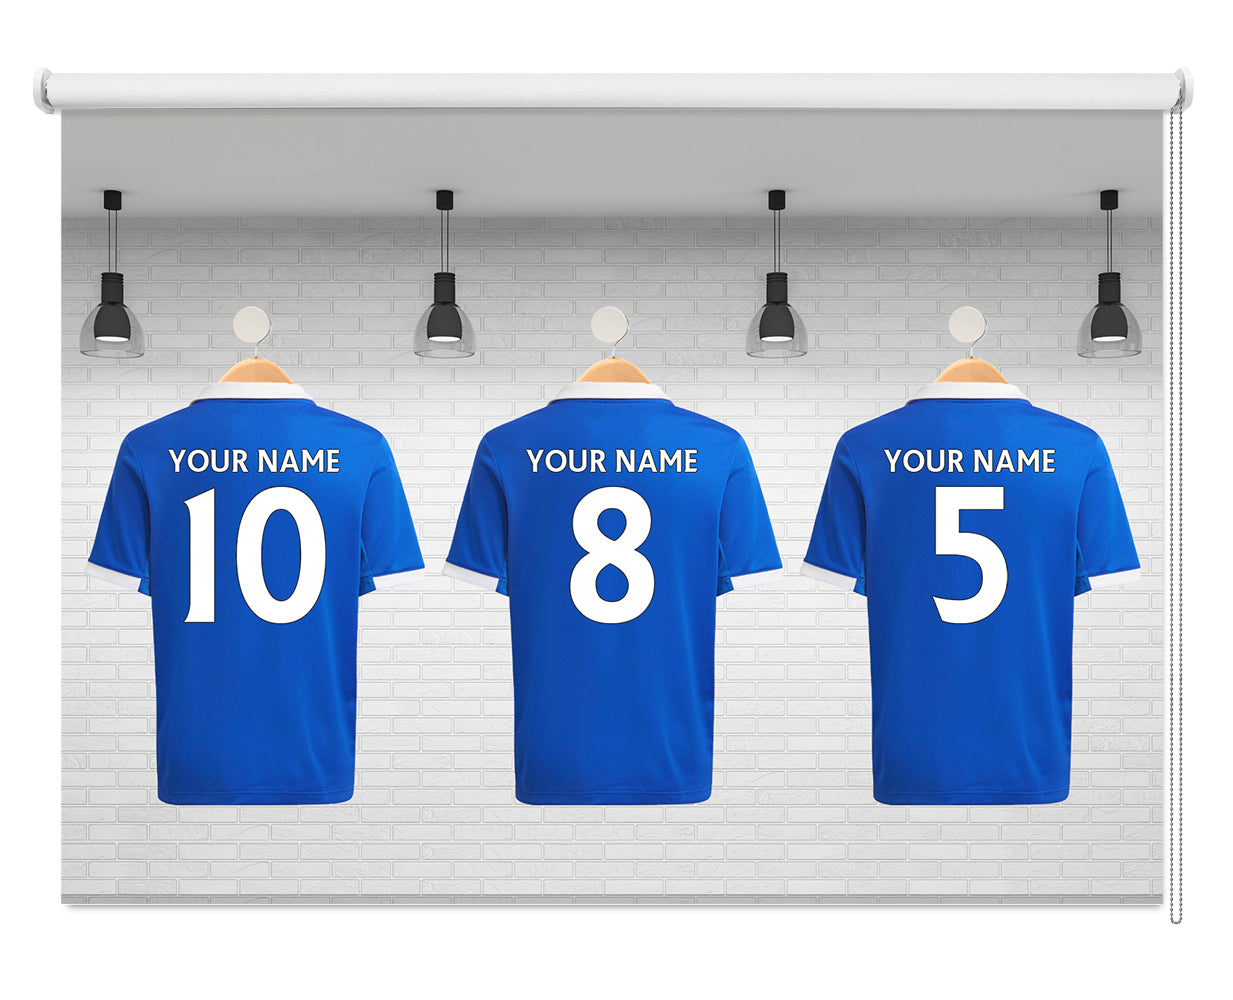 Leicester Blue Your Name Personalised Football Kit Printed Picture Photo Roller Blind  - RB1308